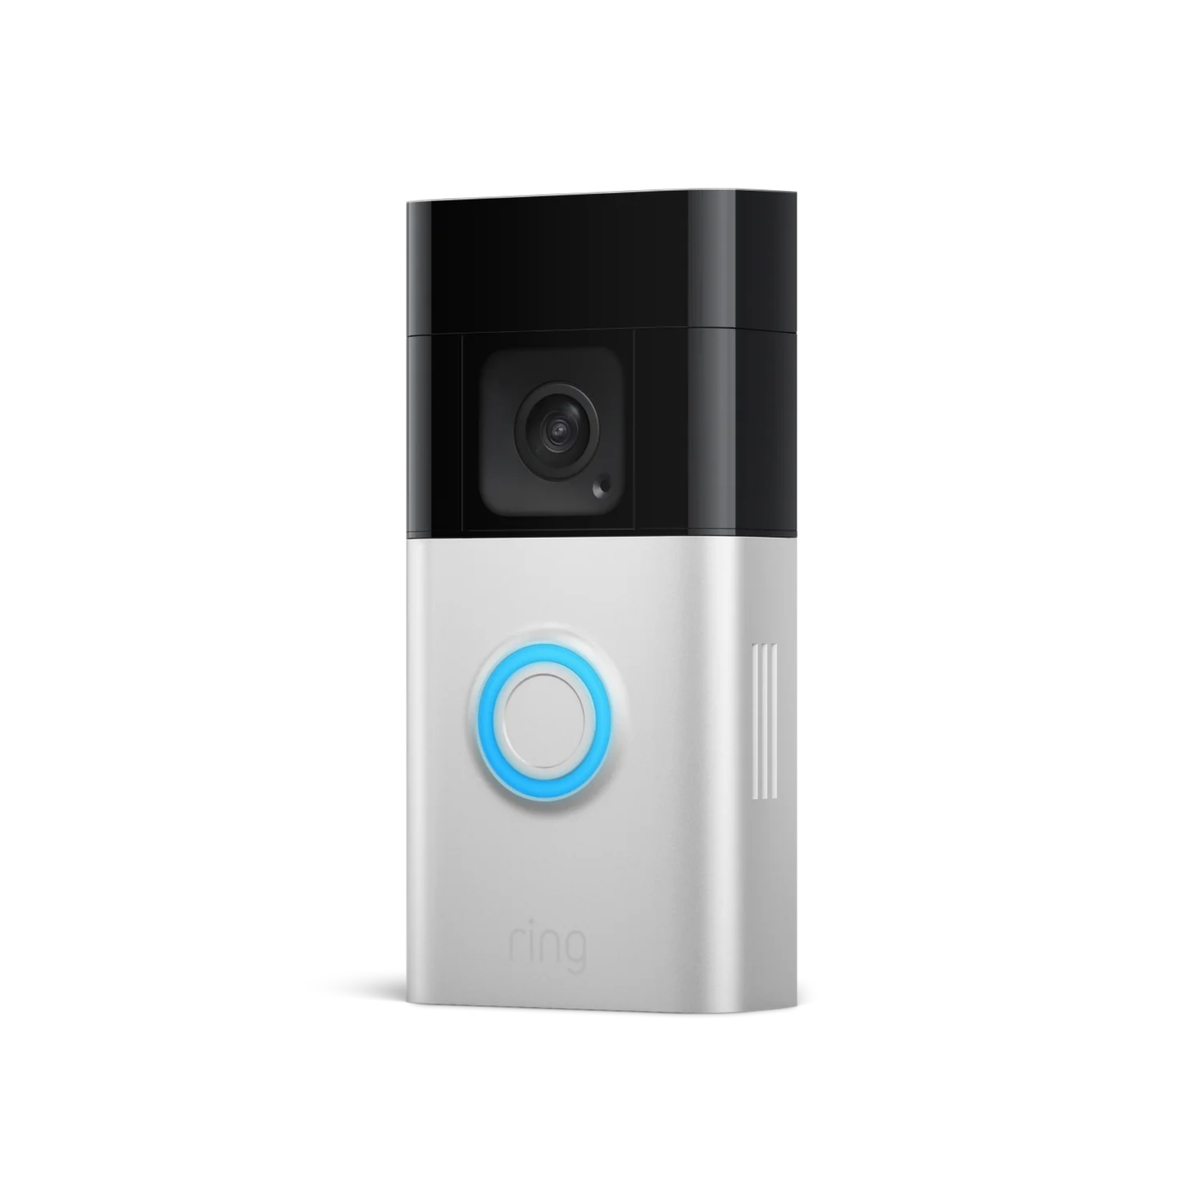 Ring Battery Video Doorbell Plus with Motion Detection, Two-Way Talk, Head-To-Toe 1536p HD Video, Satin Nickel, 8VRDP2-0ME0